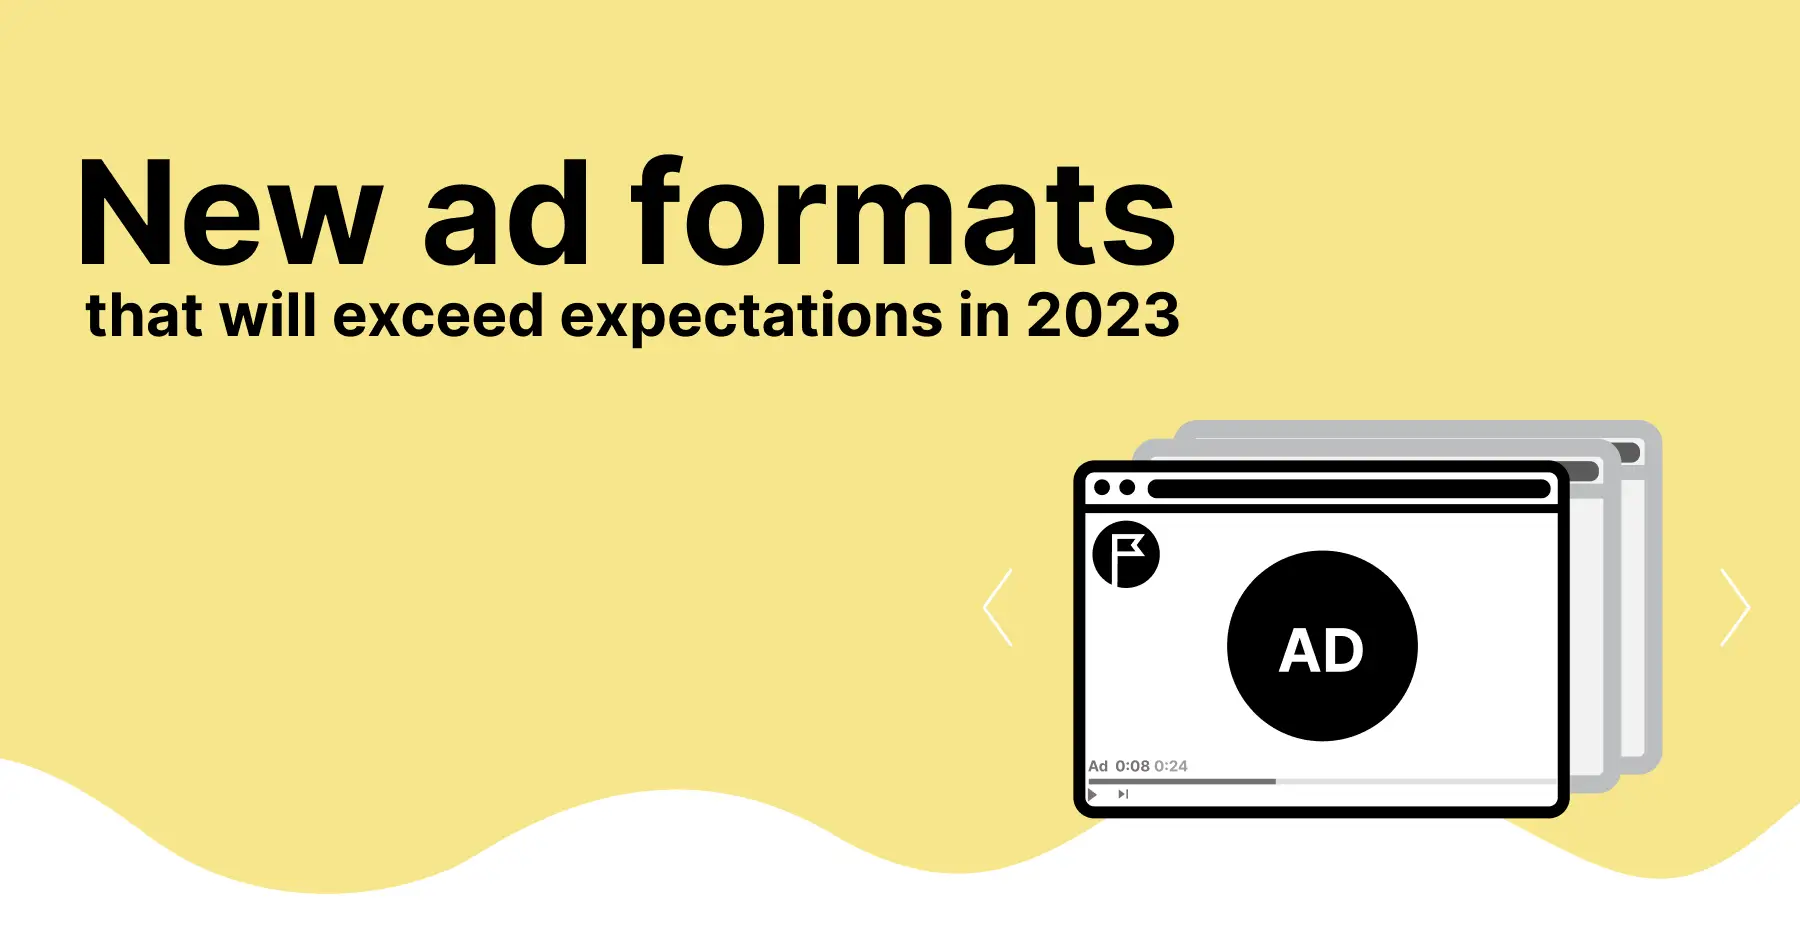 New ad formats that will exceed expectations in 2023